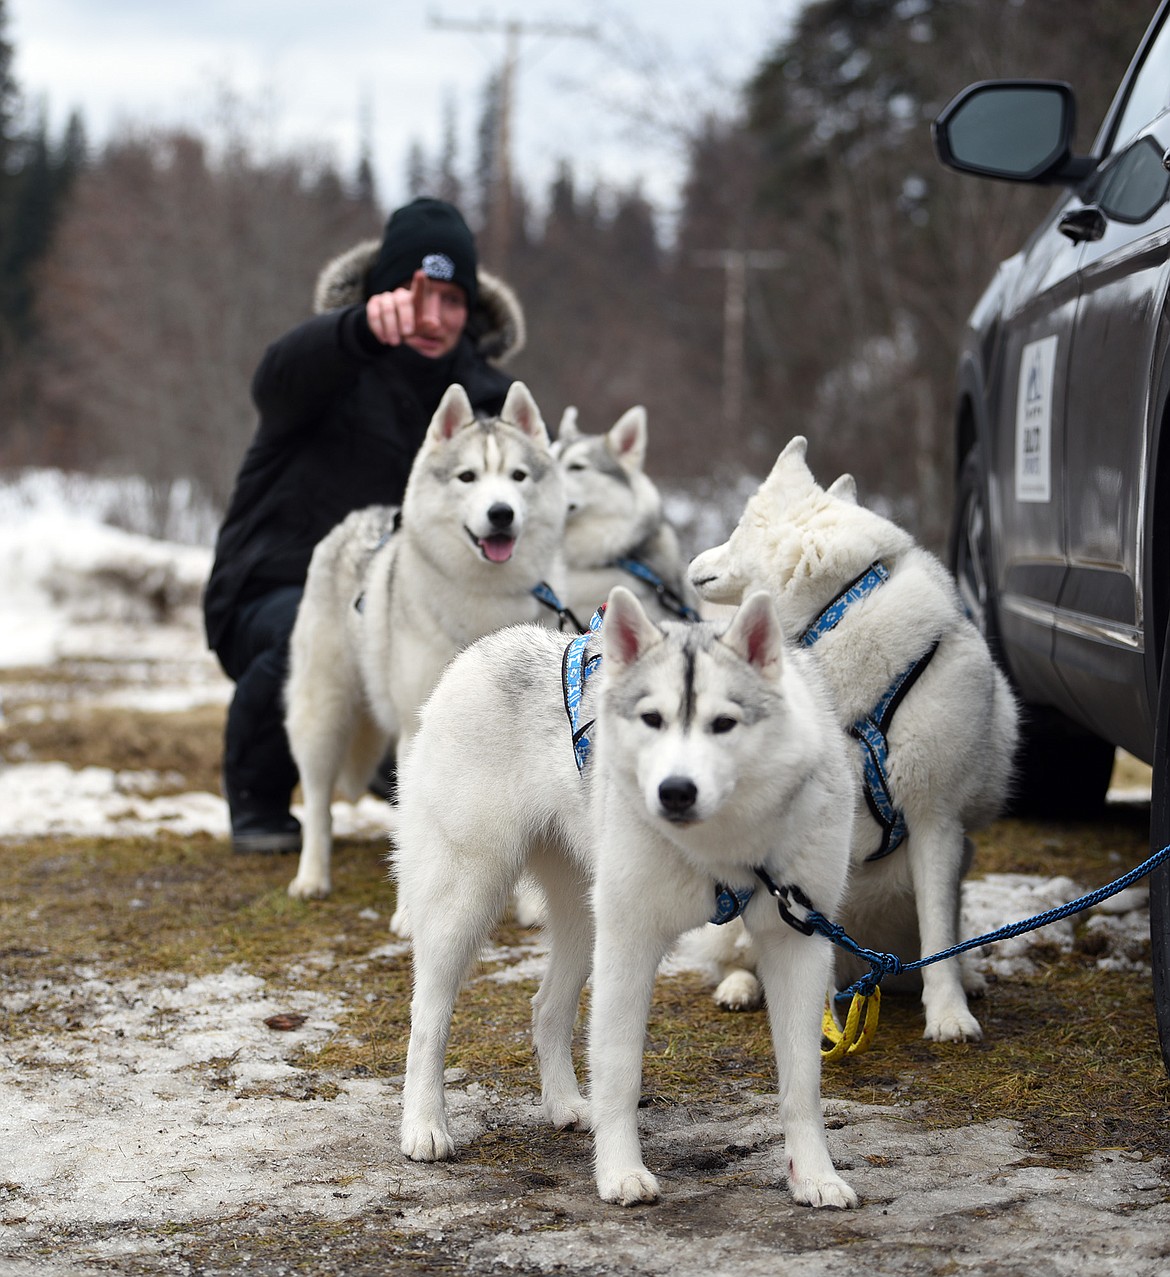 Participants at the Flathead Classic dog sled races at the Dog Creek Lodge in Olney. (Julie Engler/Whitefish Pilot)